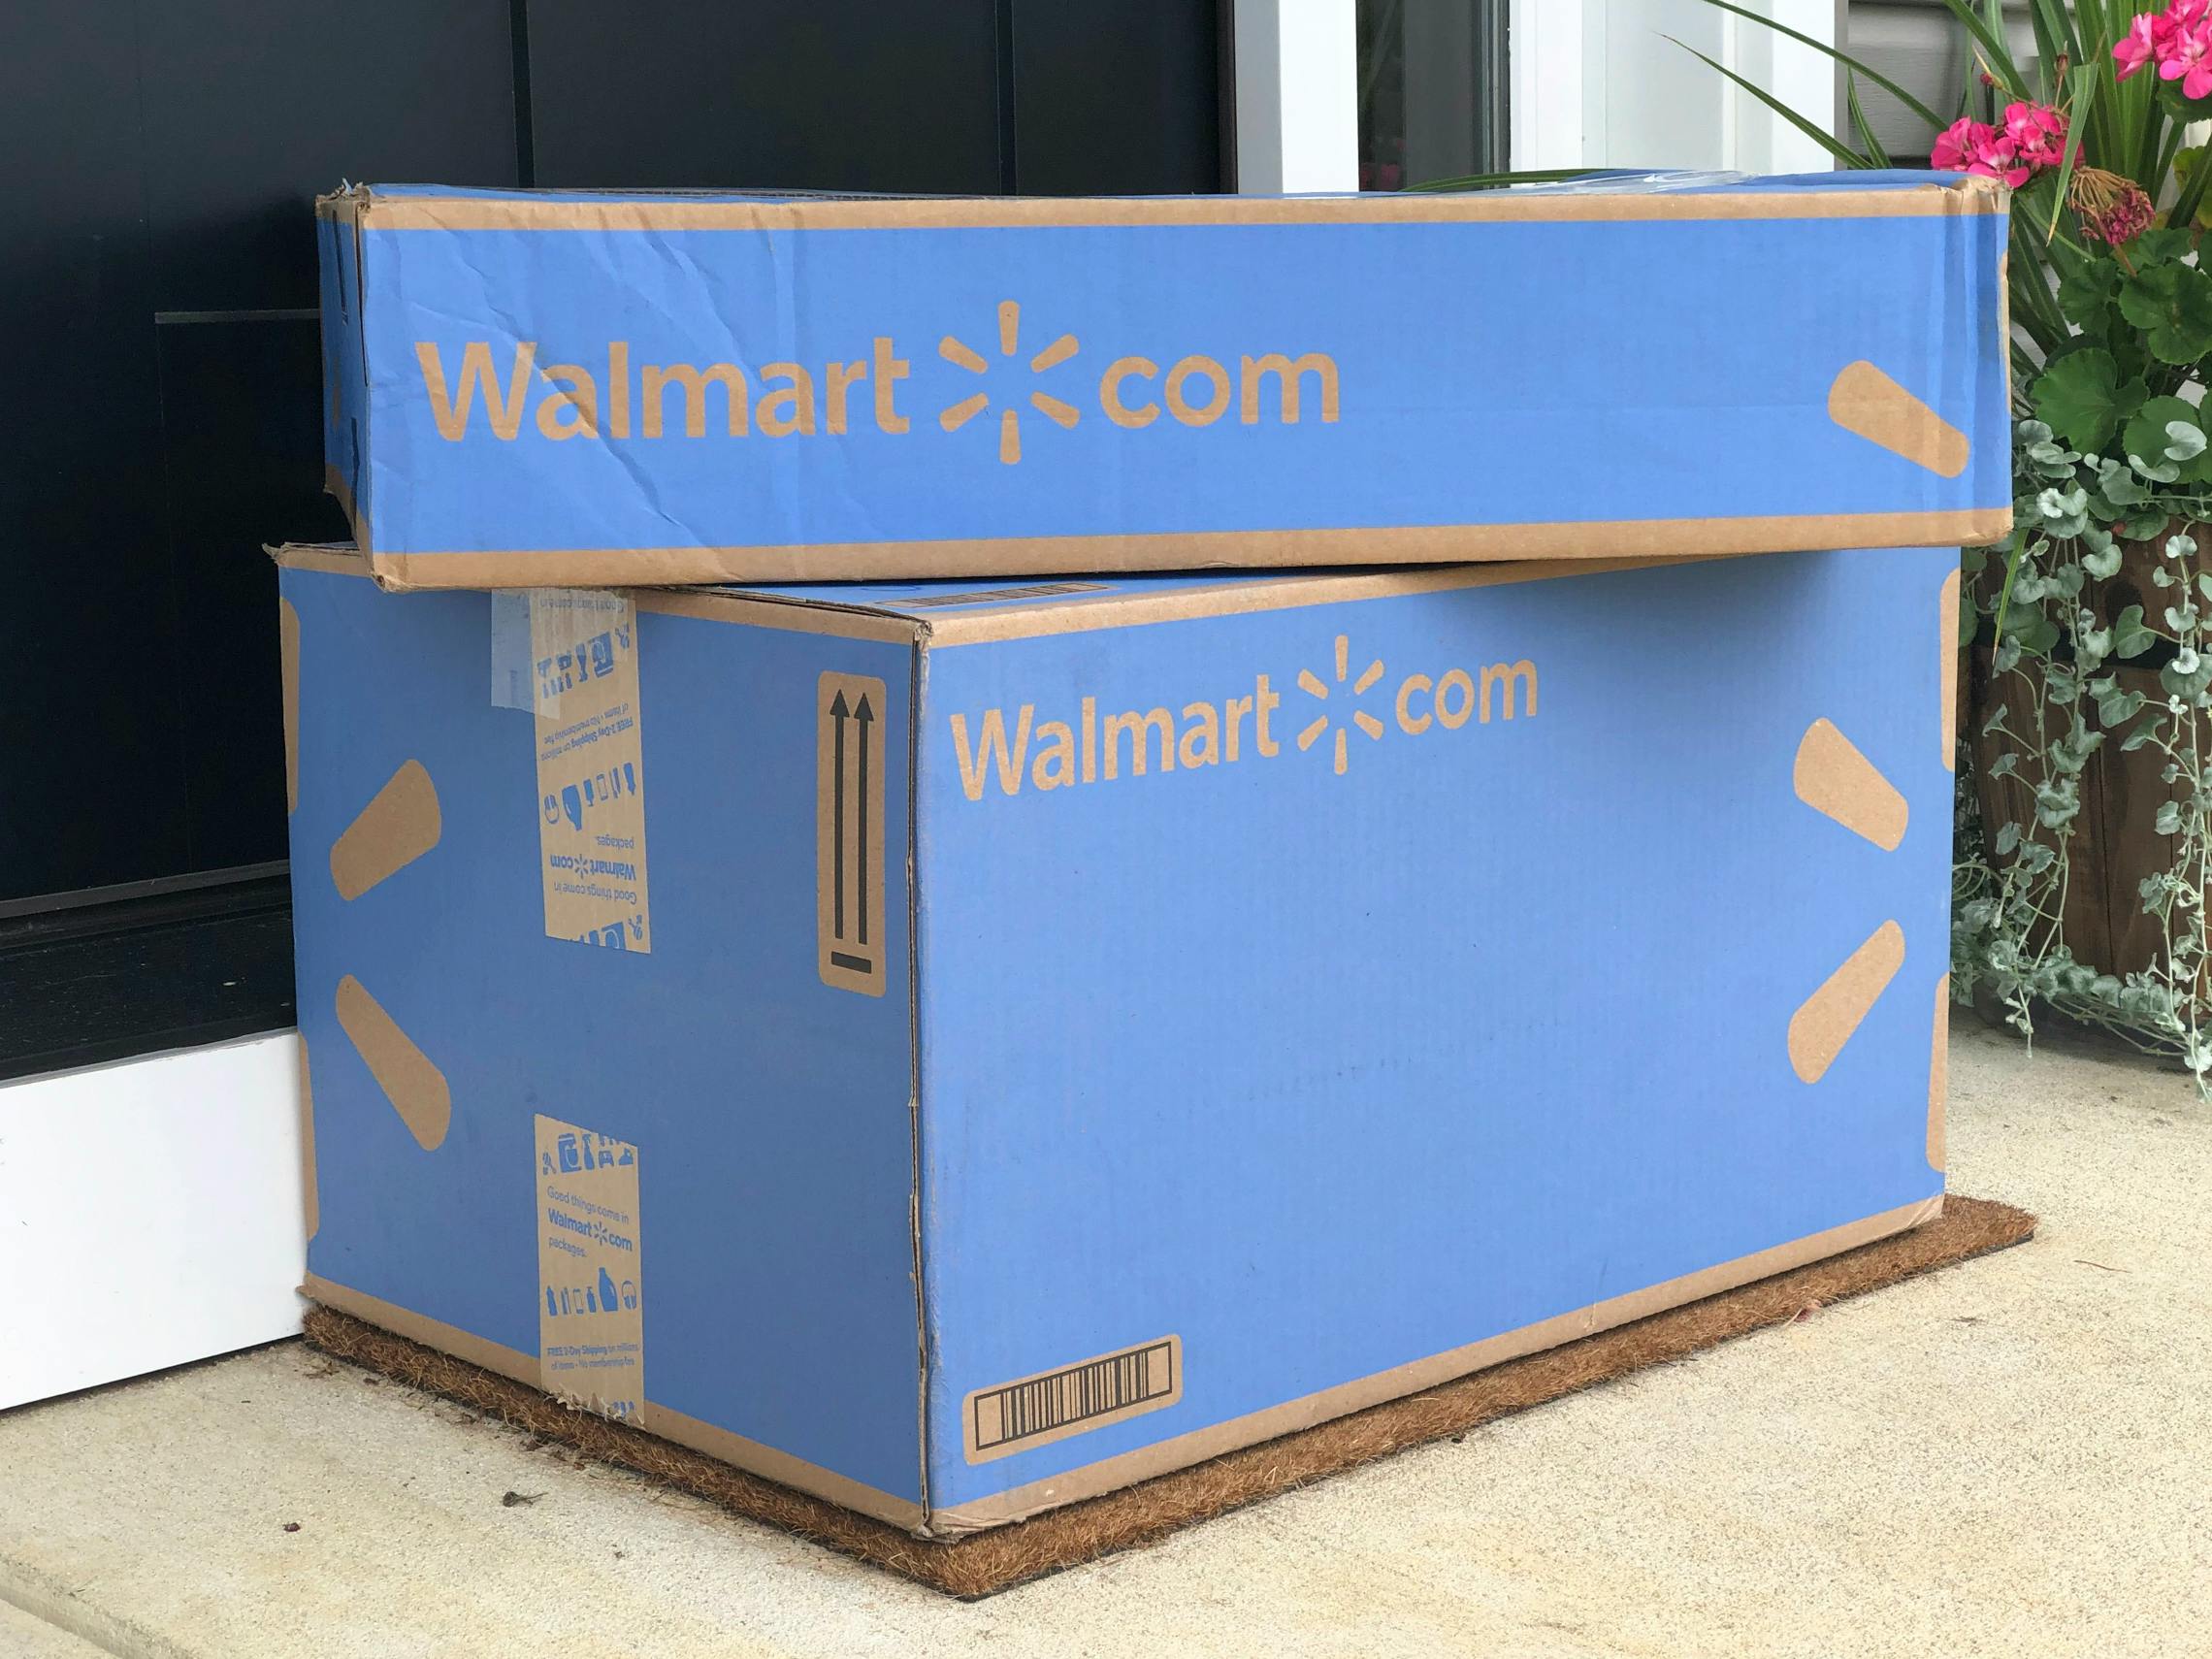 Two Walmart boxes on a doorstep